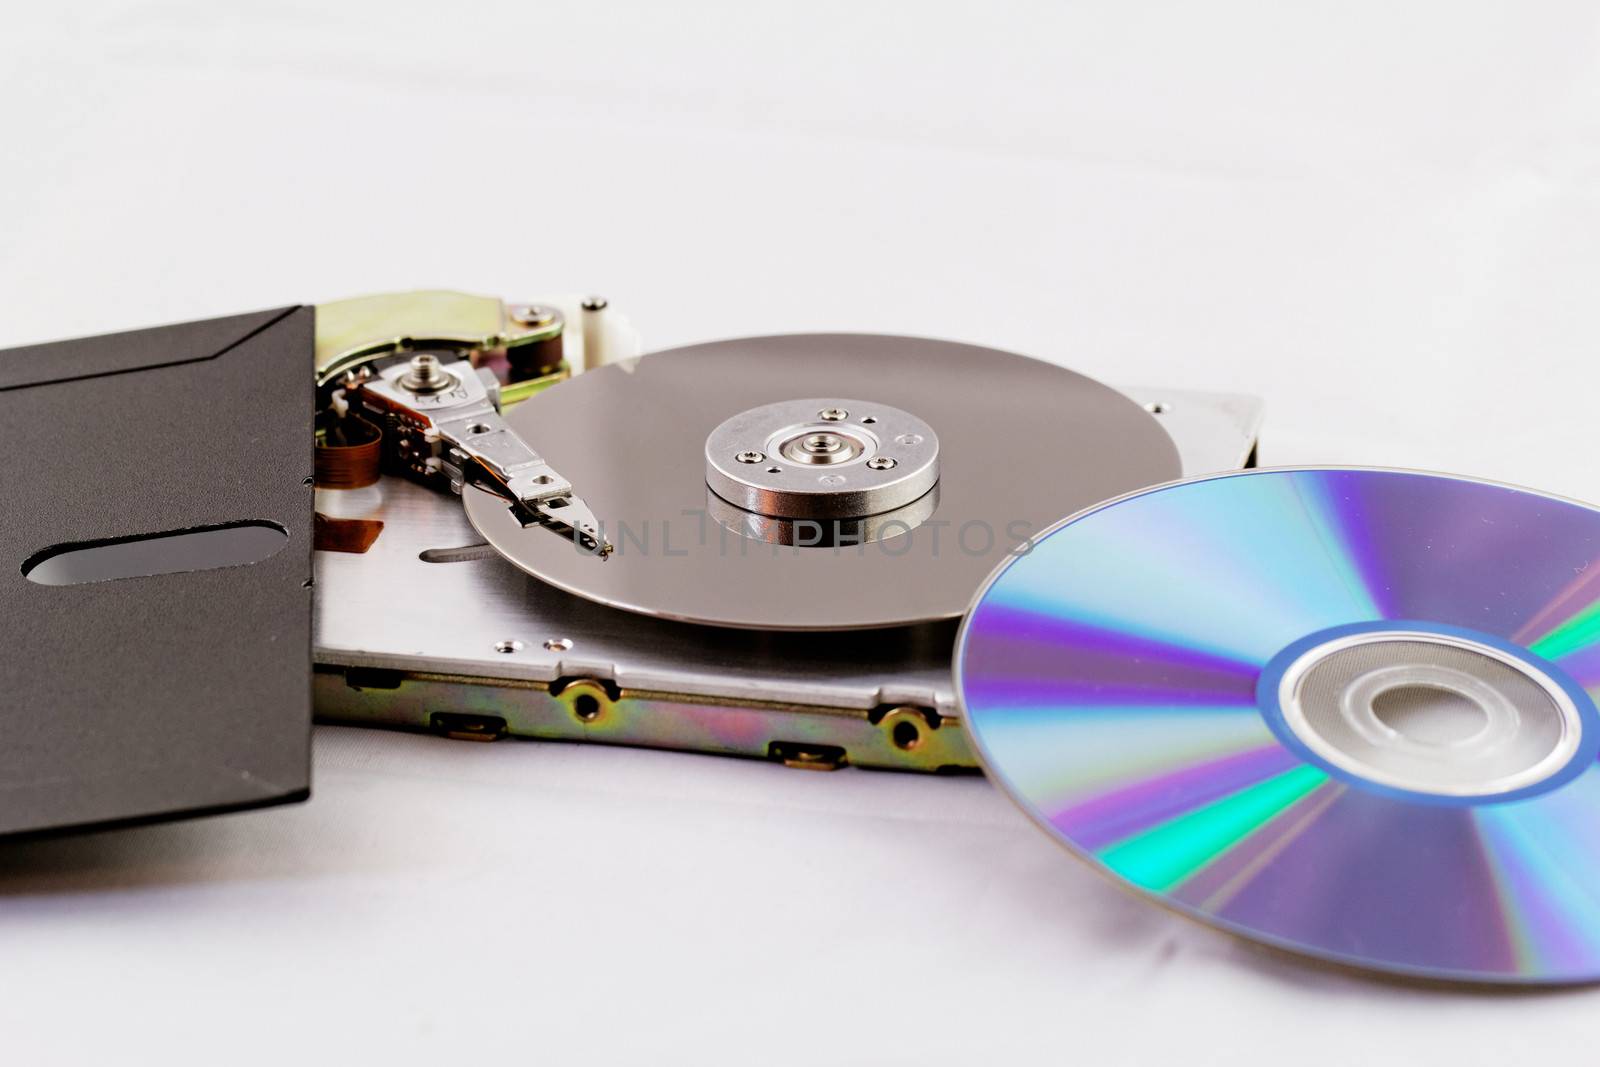 old and modern technics (floppy, cd, dvd, hdd side by side) on white background